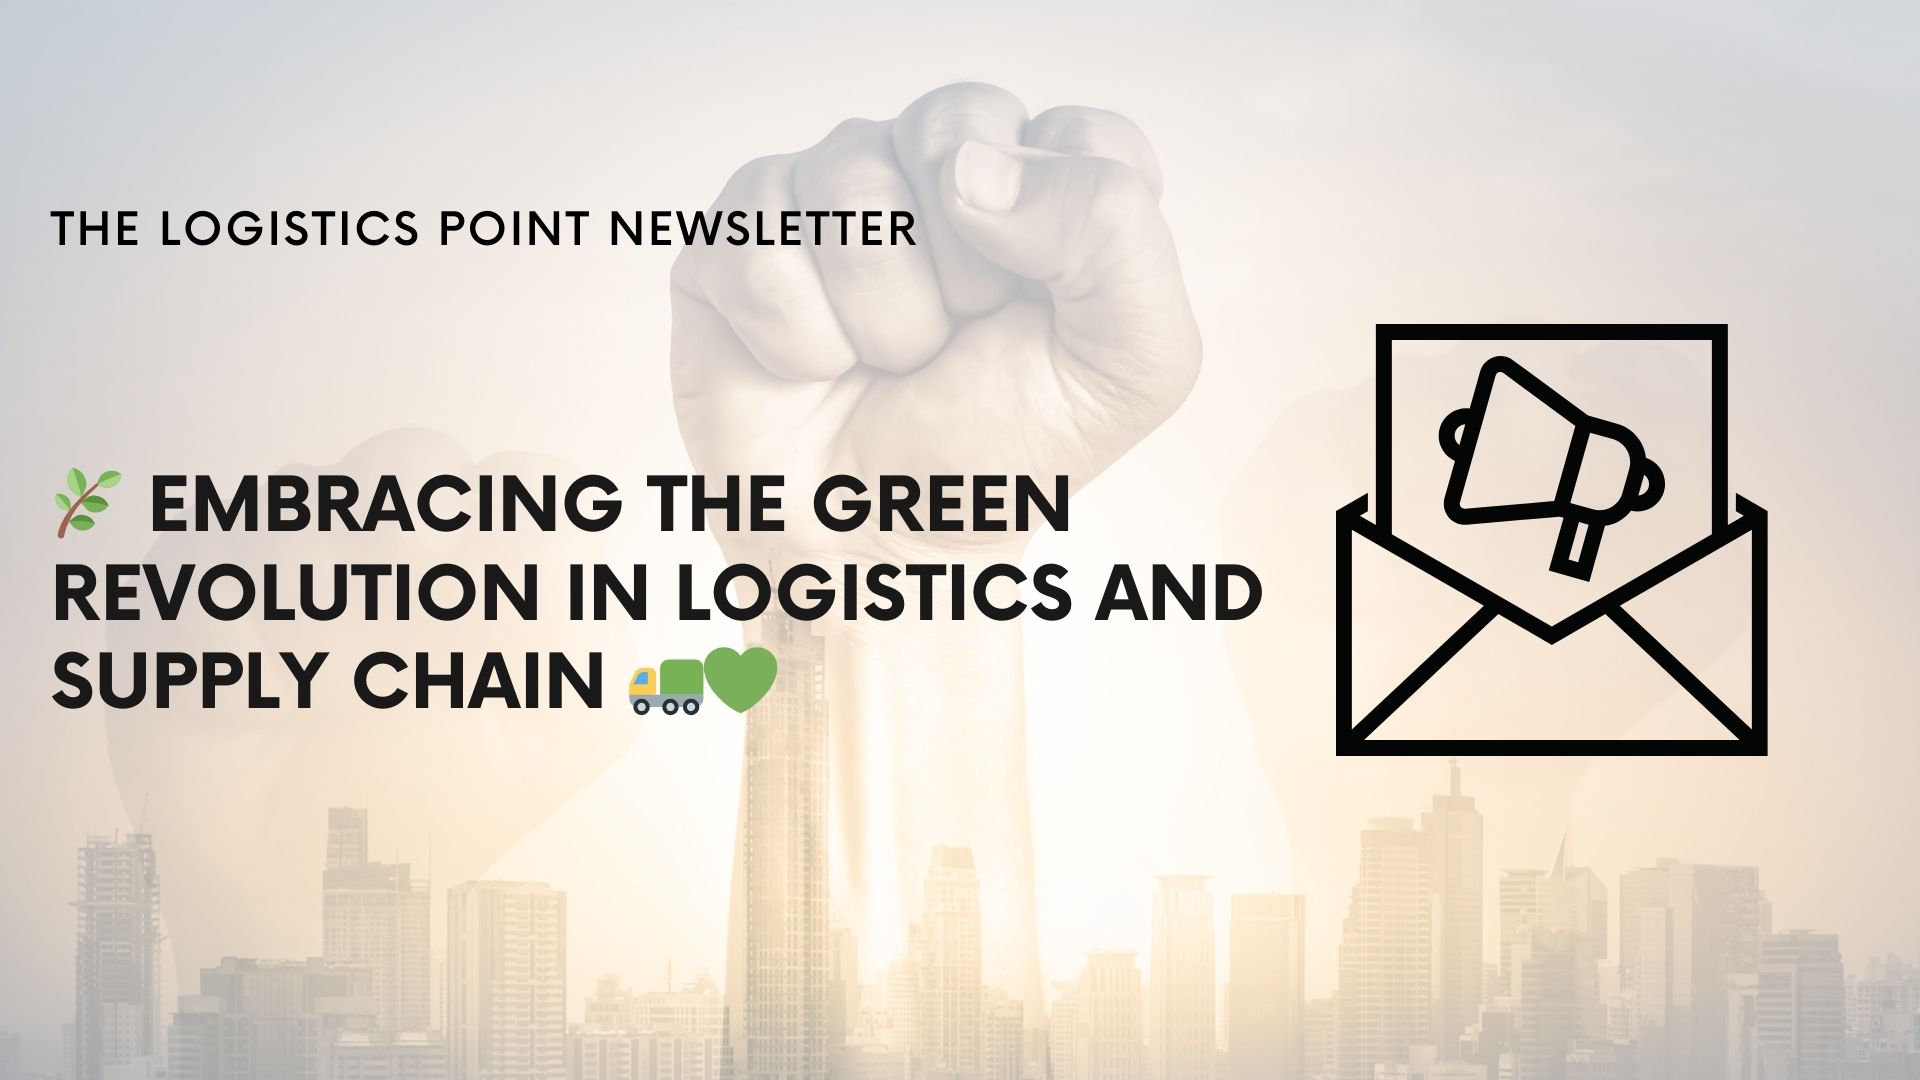 Embracing the Green Revolution in Logistics and Supply Chain